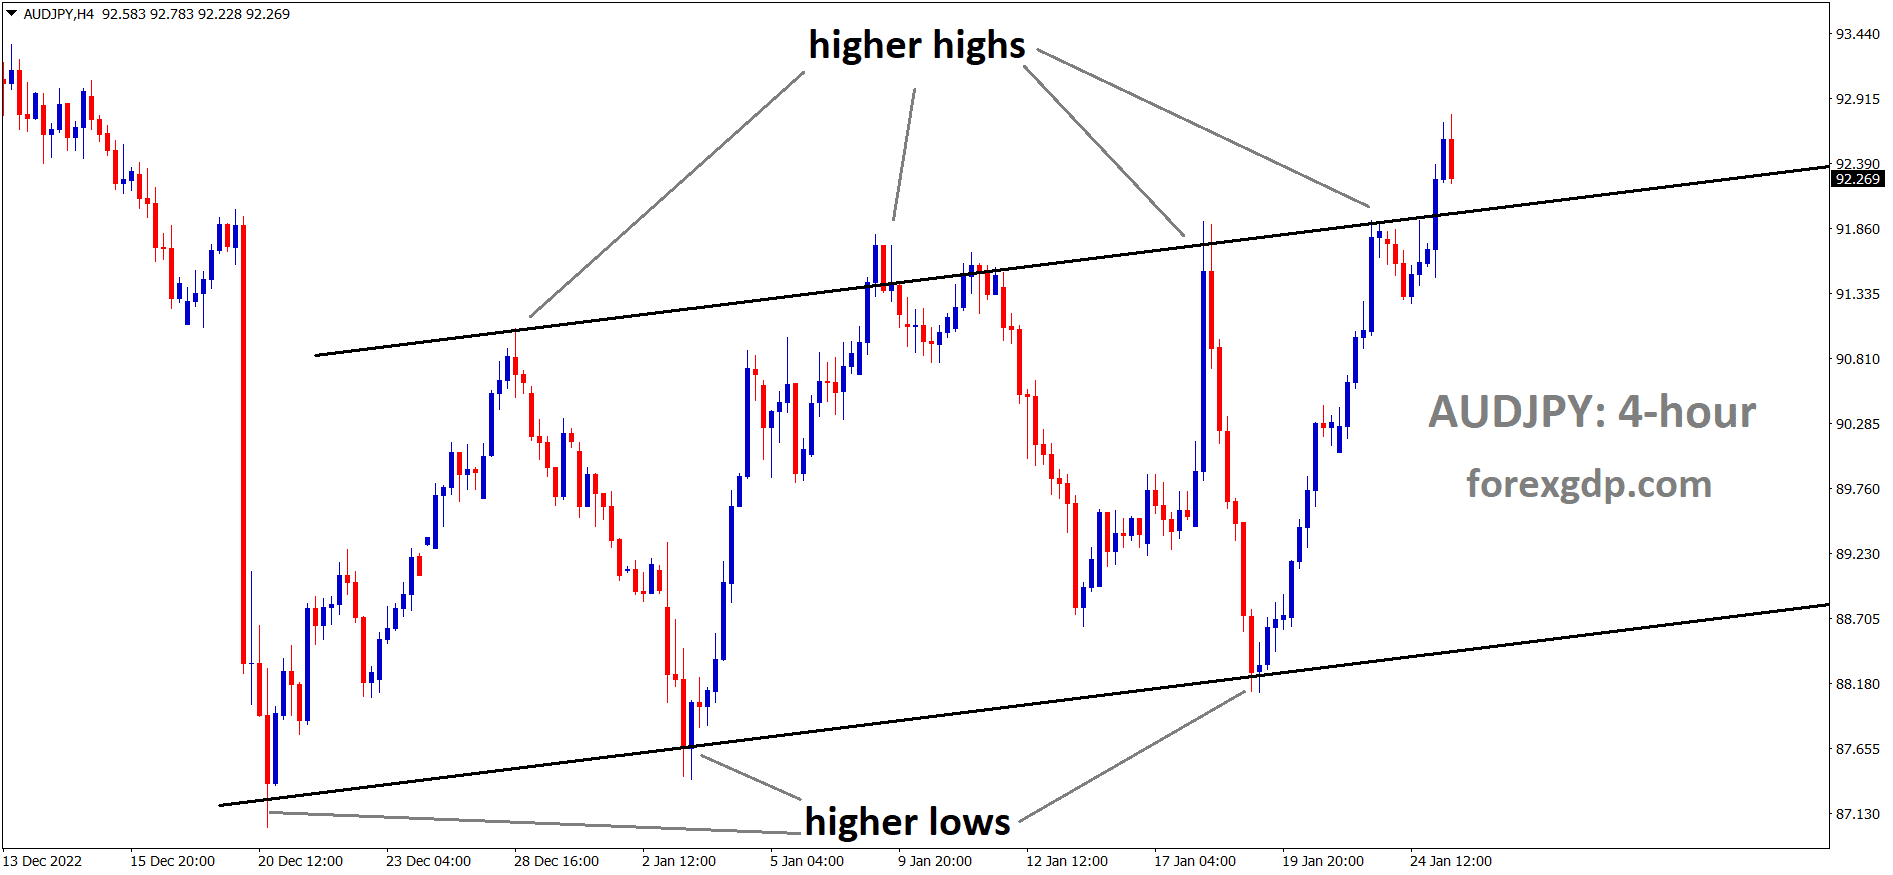 AUDJPY is moving in a Ascending channel and the market has reached the higher high area of the channel.